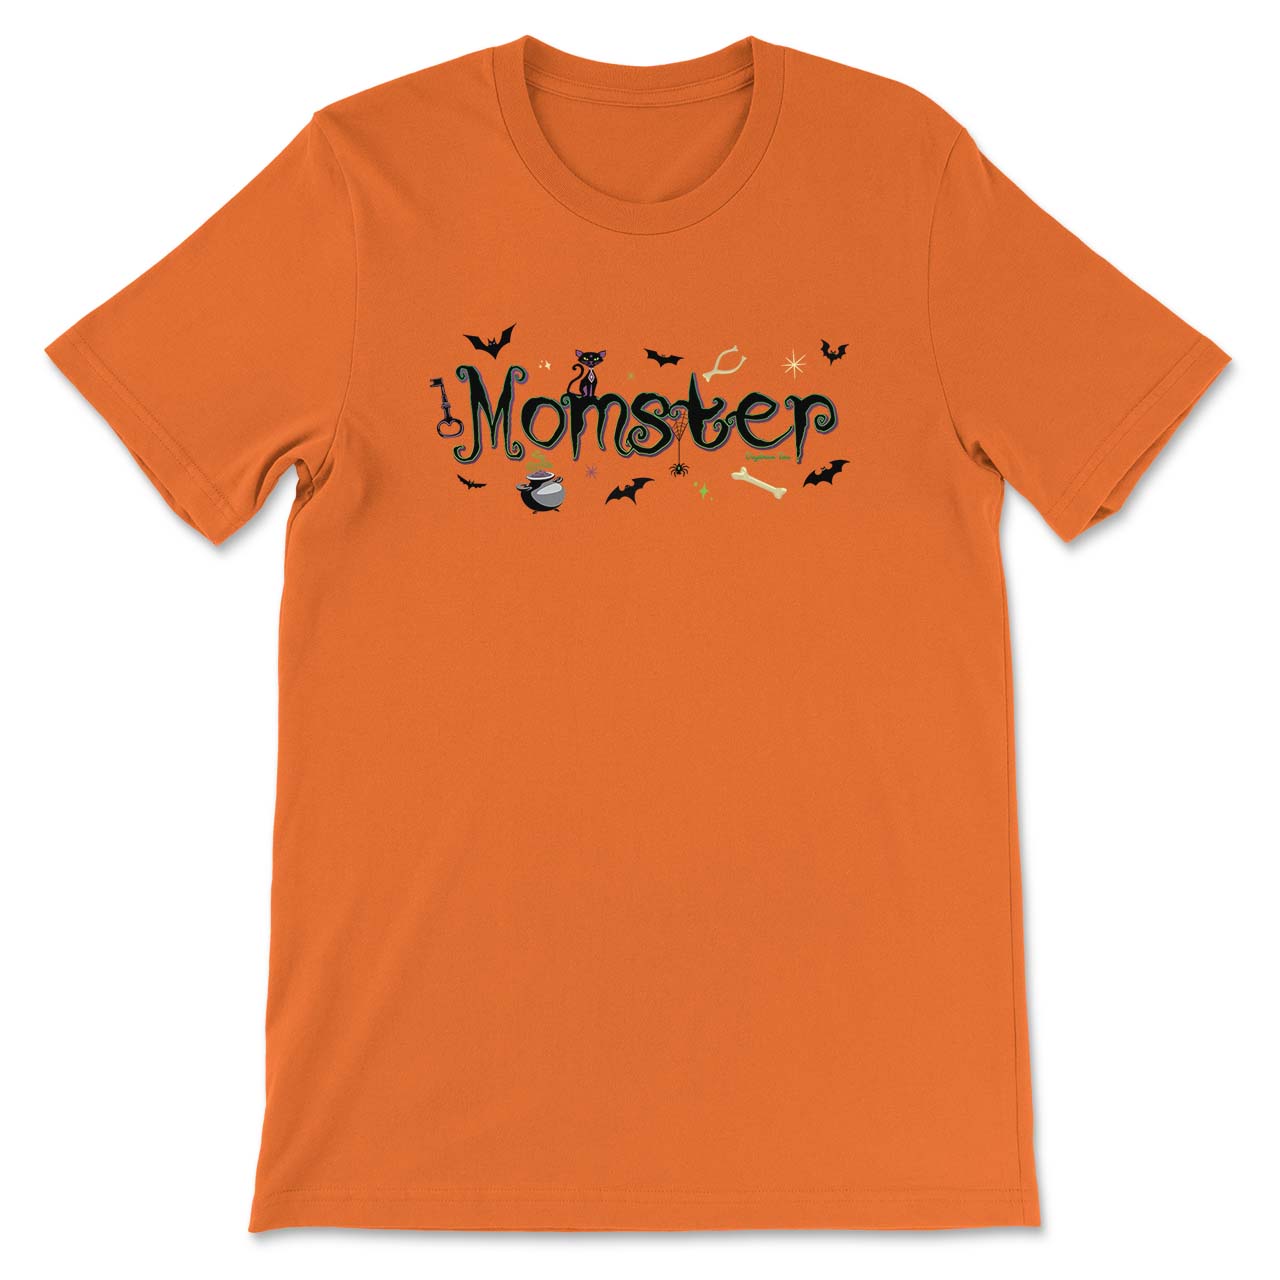 Daydream Tees Momster